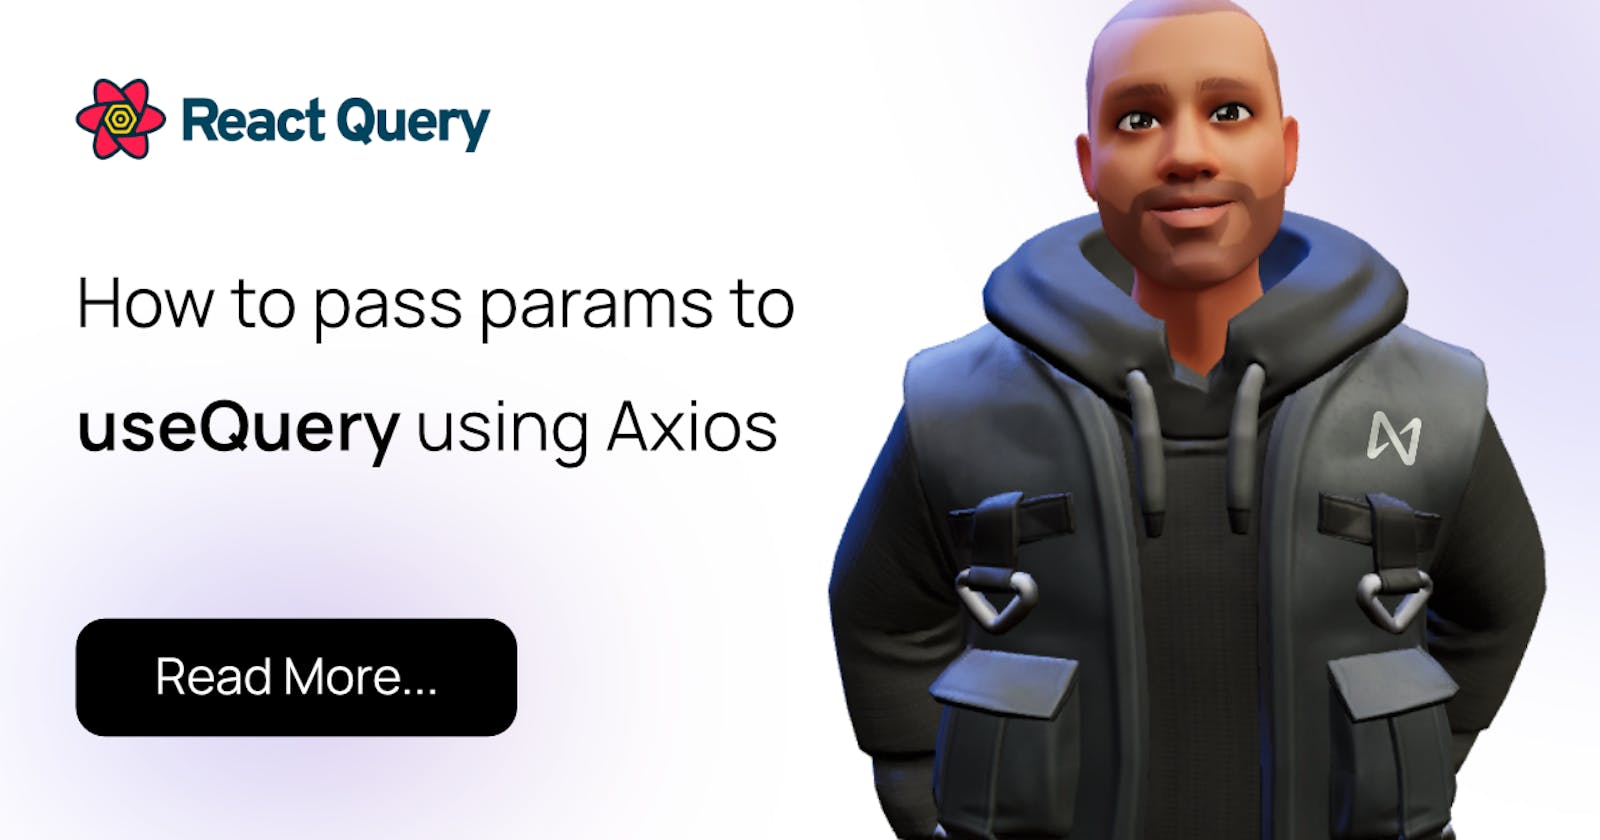 How to pass parameters to useQuery using Axios